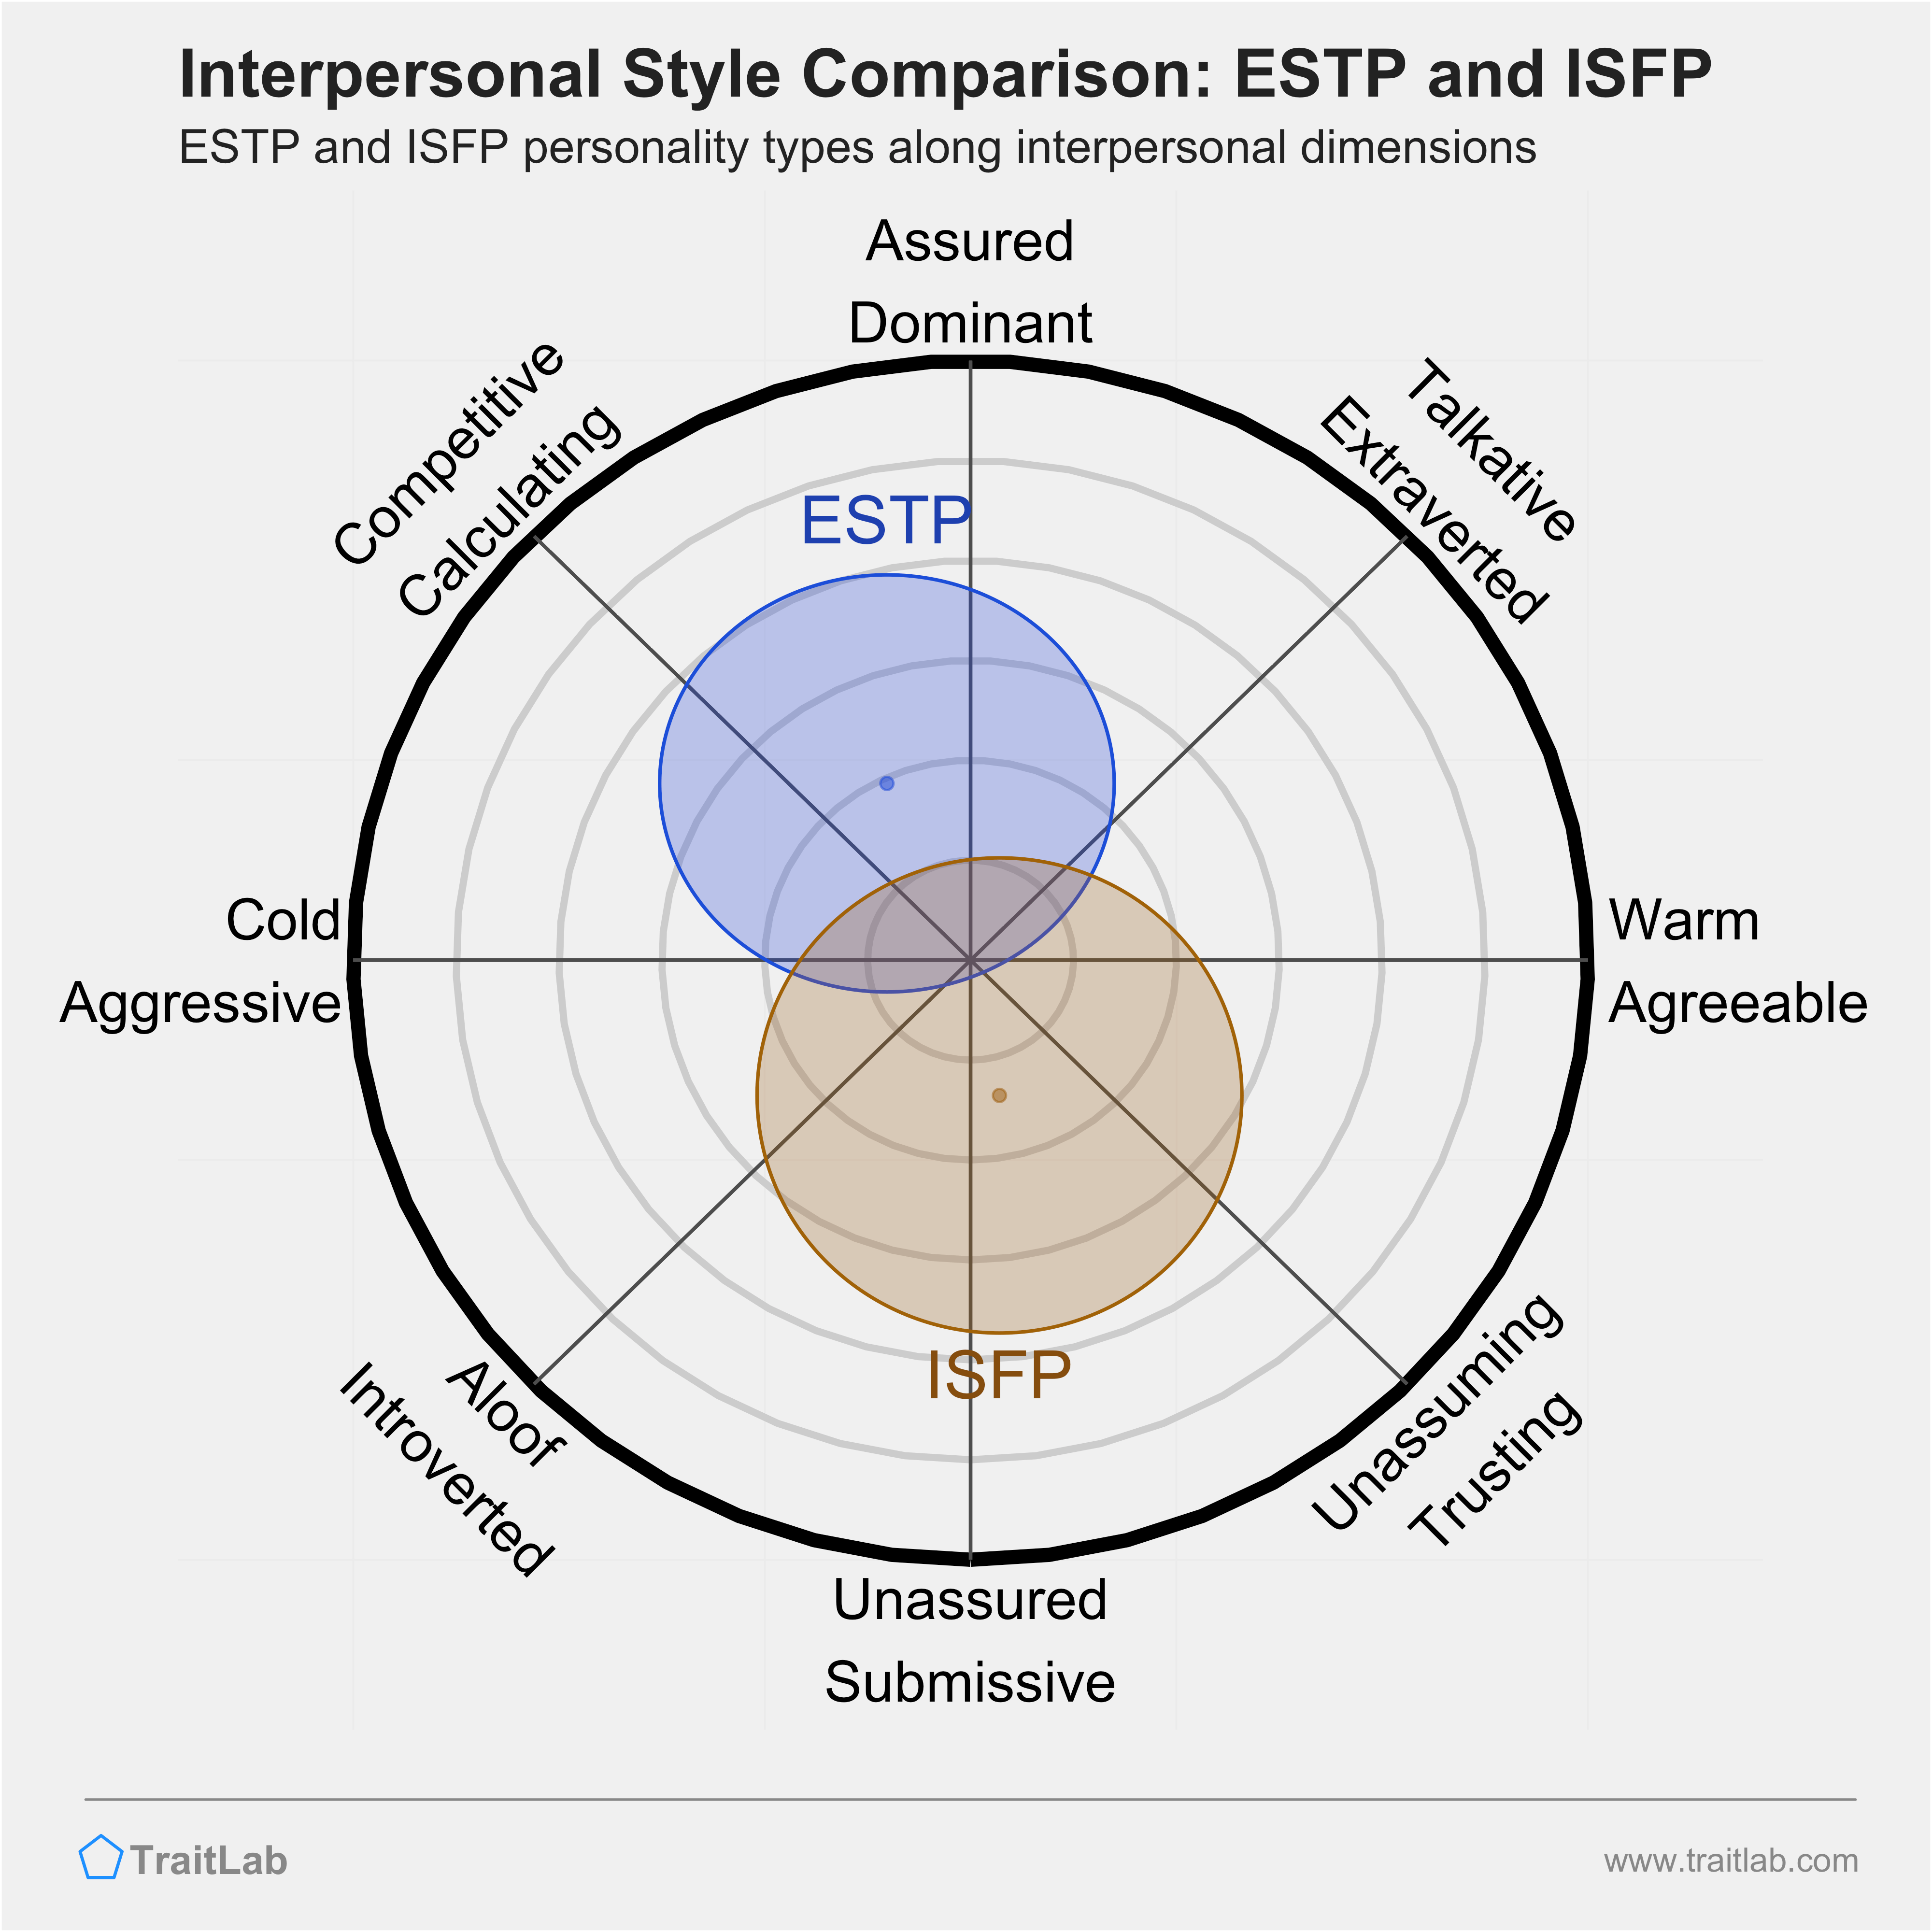 ESTP and ISFP comparison across interpersonal dimensions